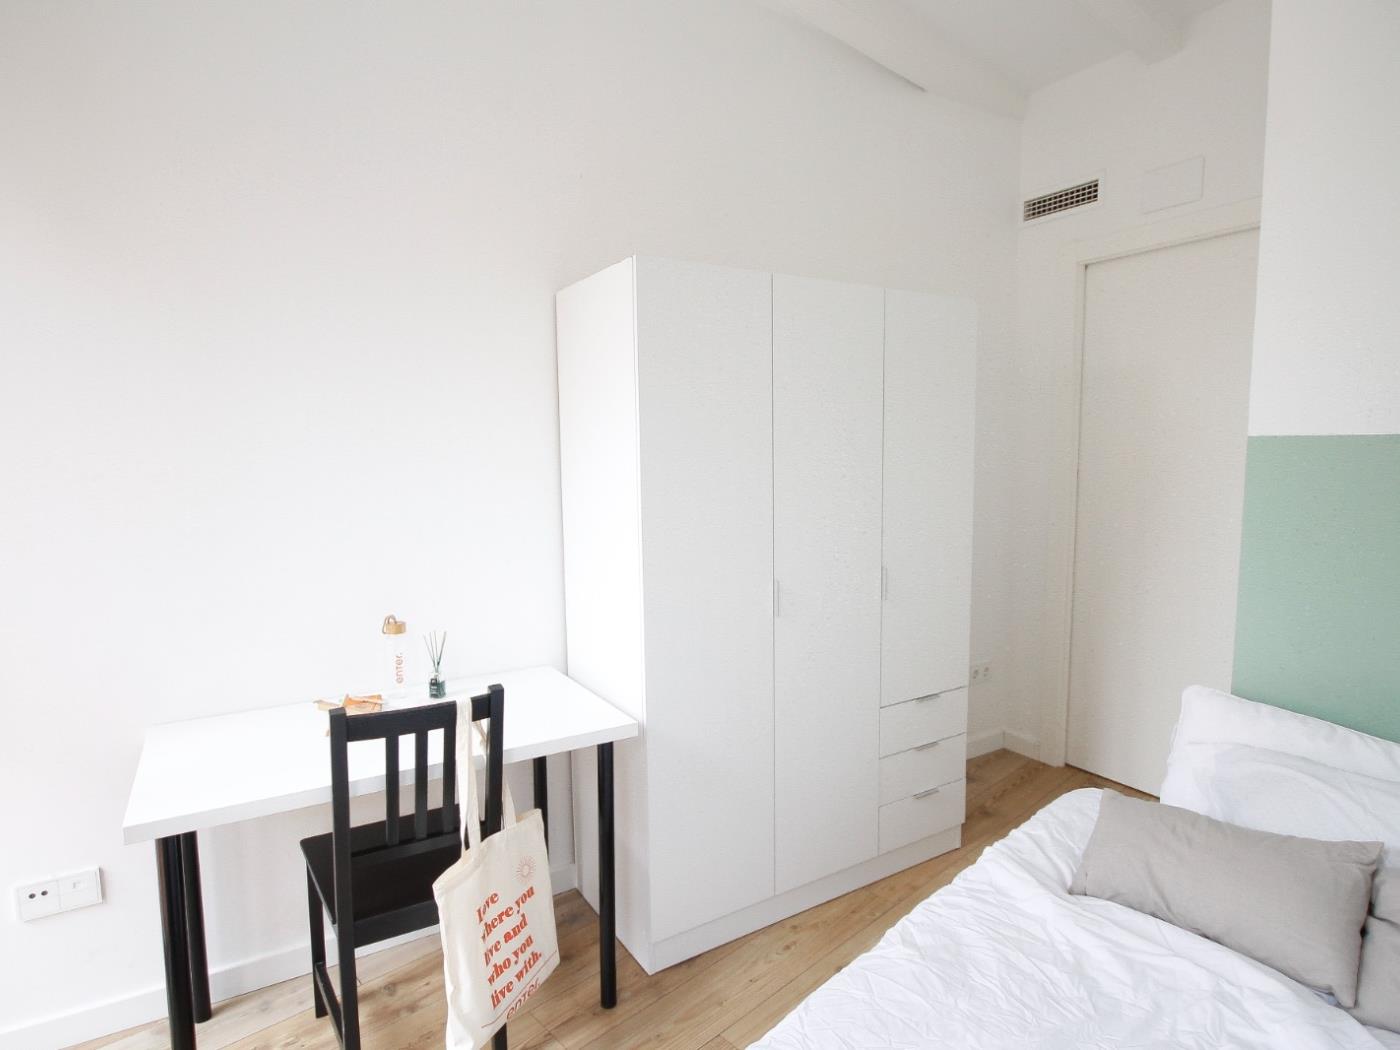  - My Space Barcelona Appartements